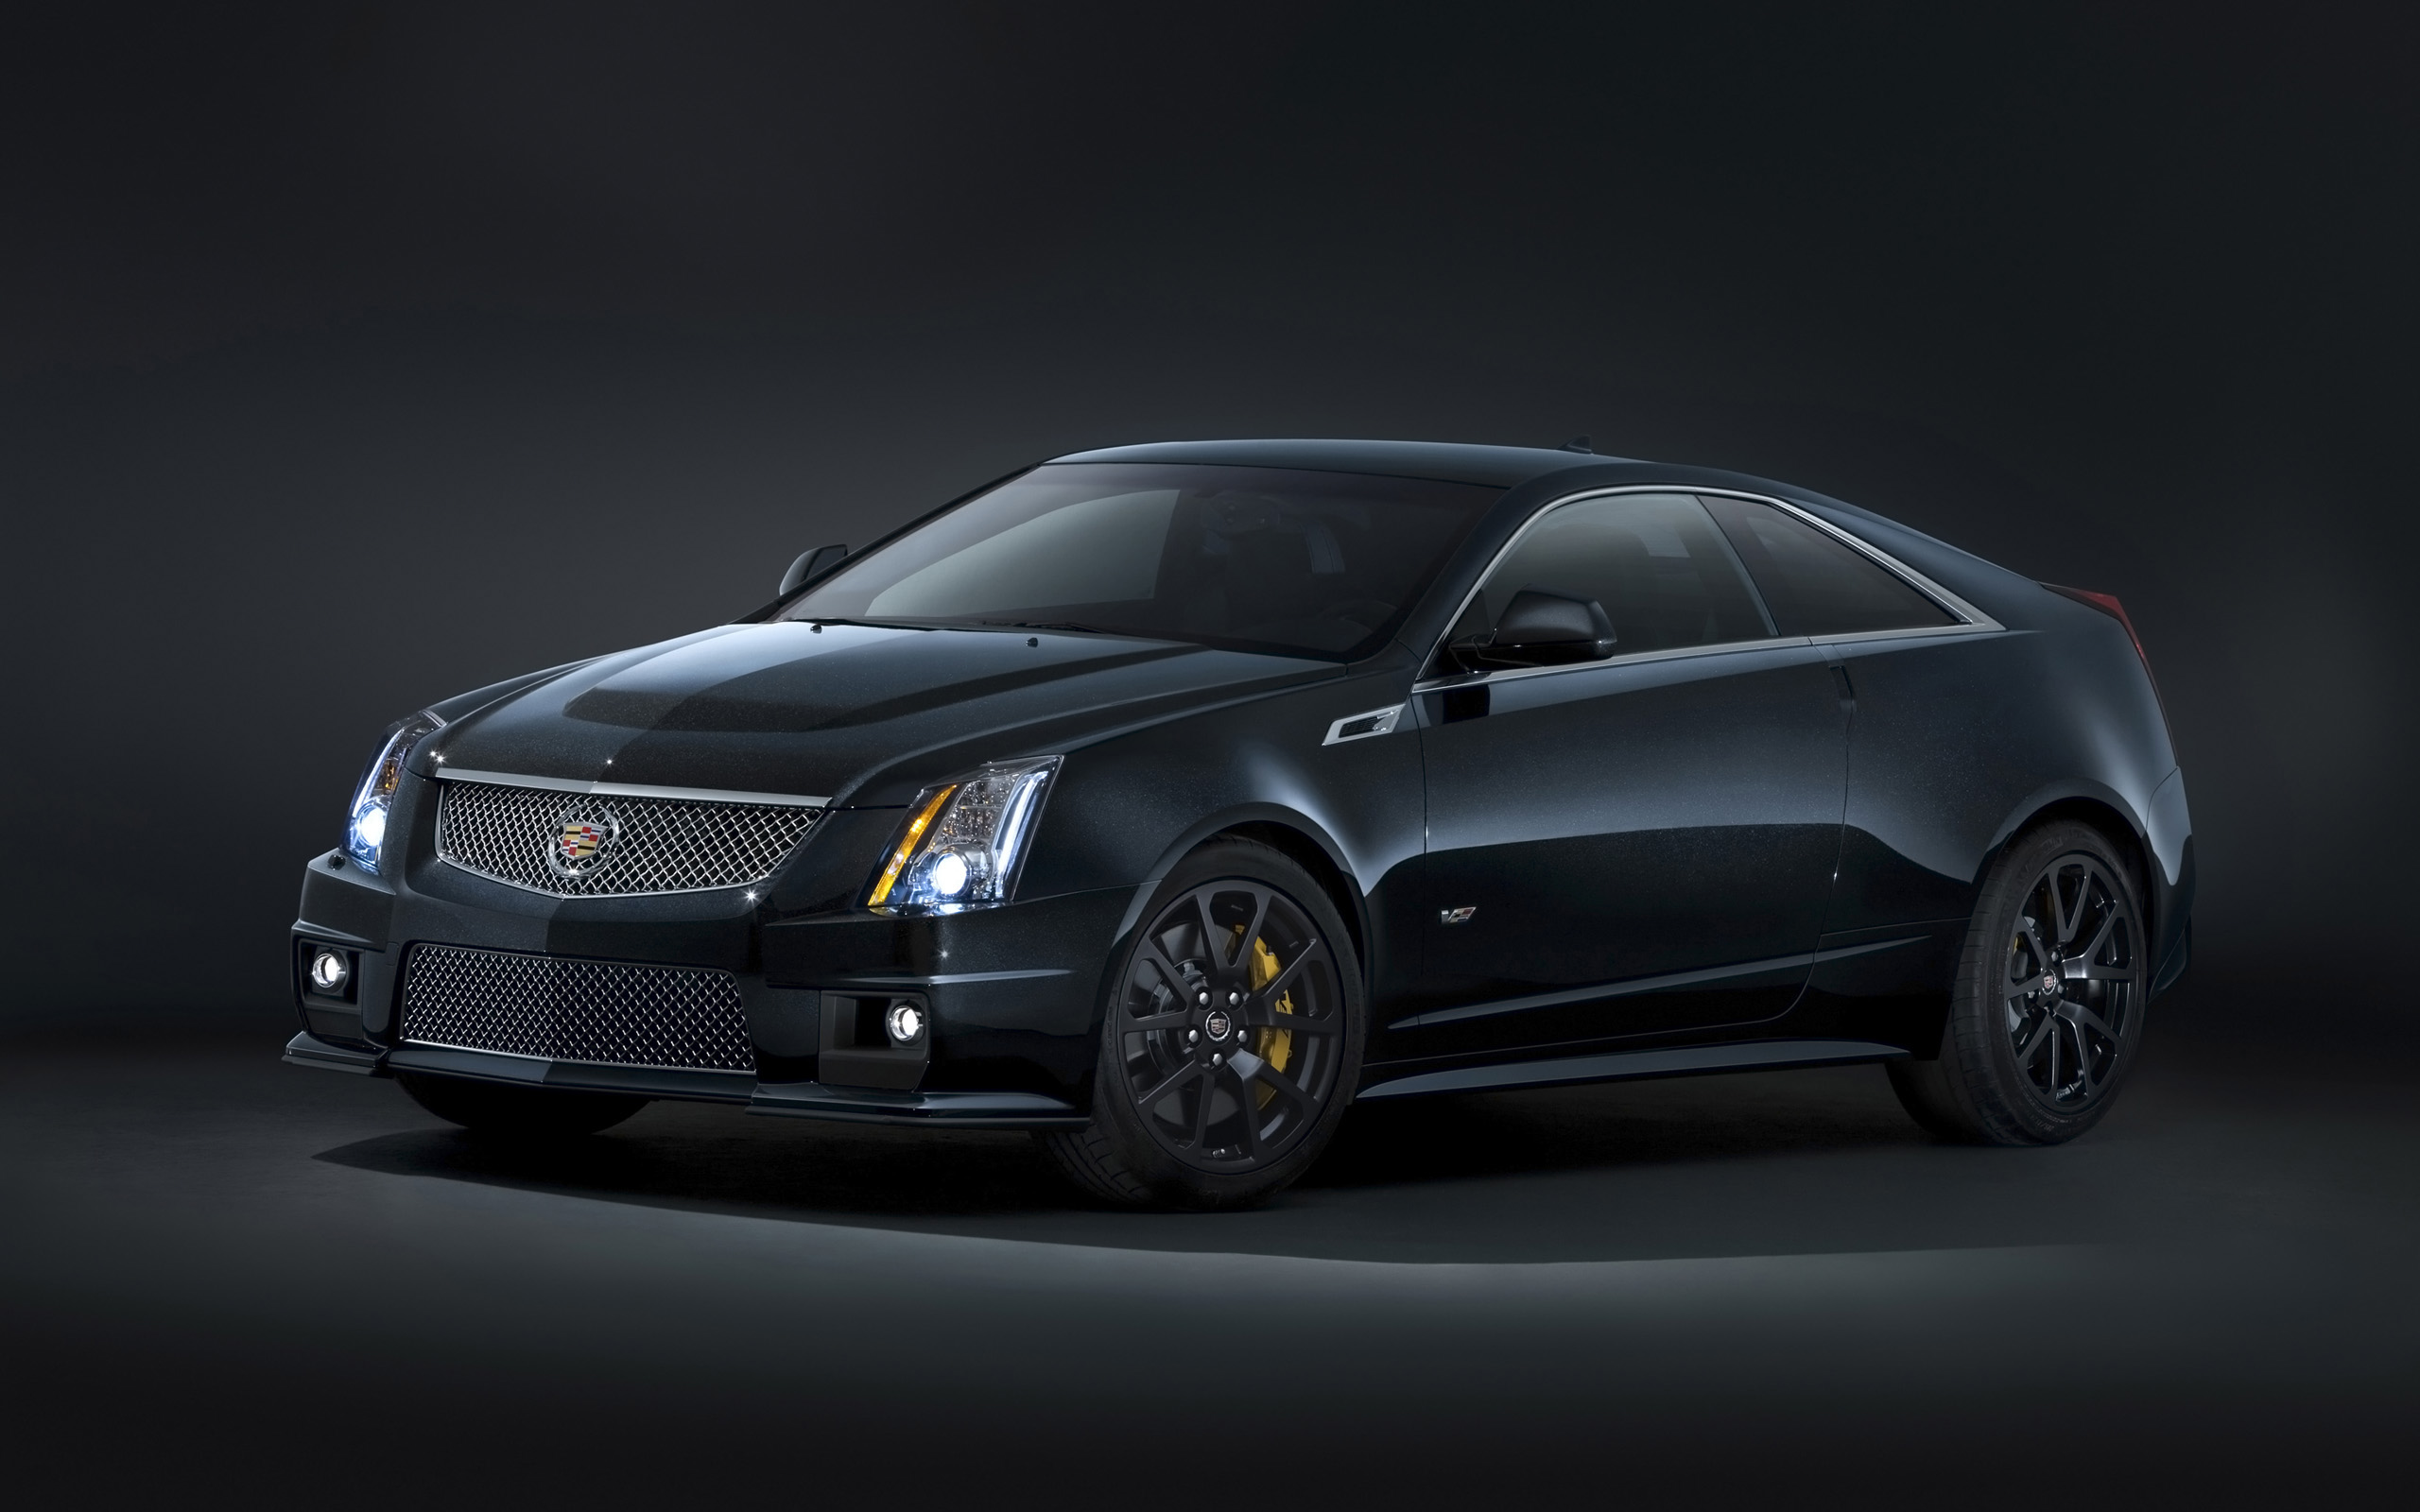 16+ Cadillac Cts V 2014 Coupe Wallpaper free download